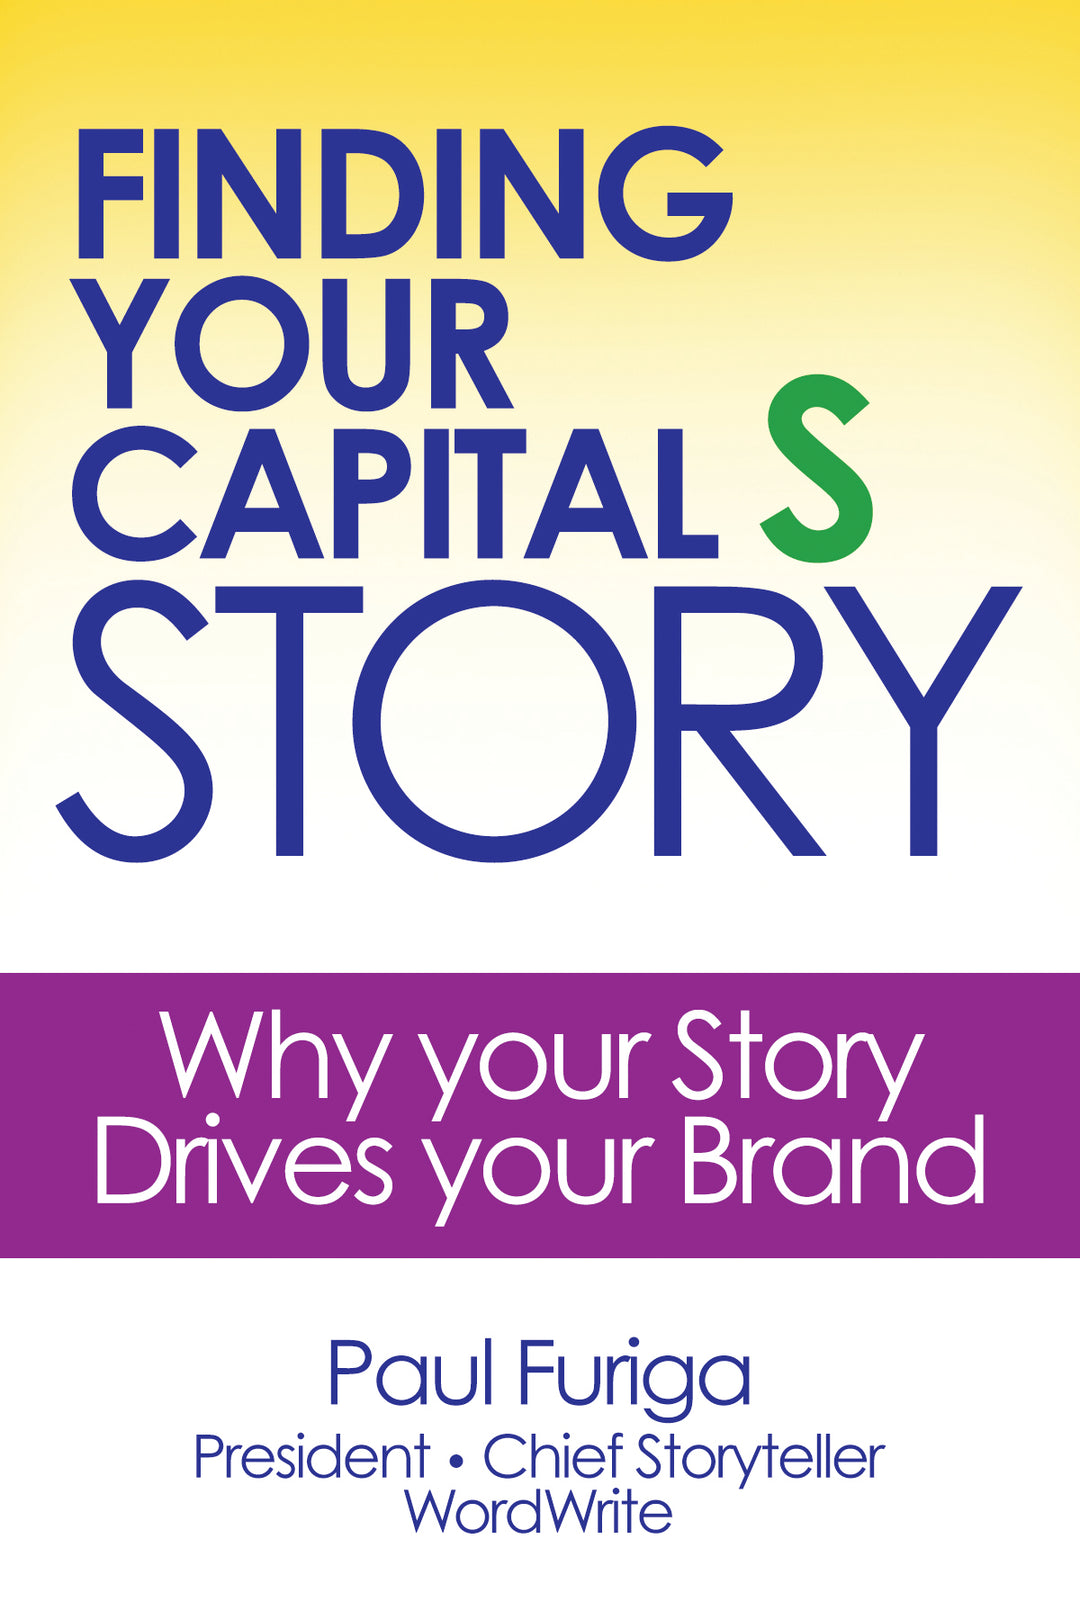 Finding Your Capital S Story: Why your Story Drives your Brand